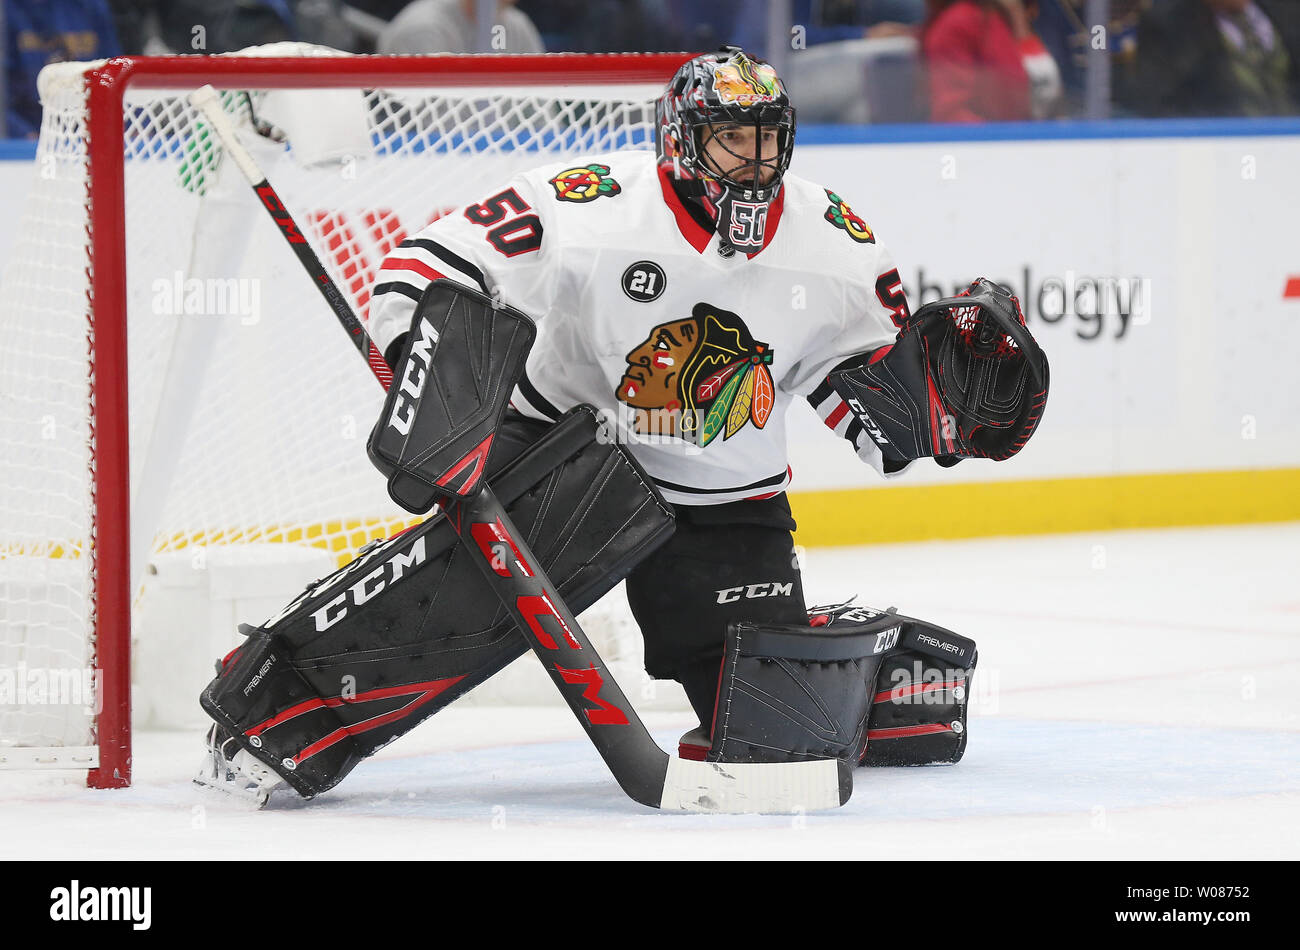 Corey Crawford “unfit to play” as training camp begins – NBC Sports Chicago